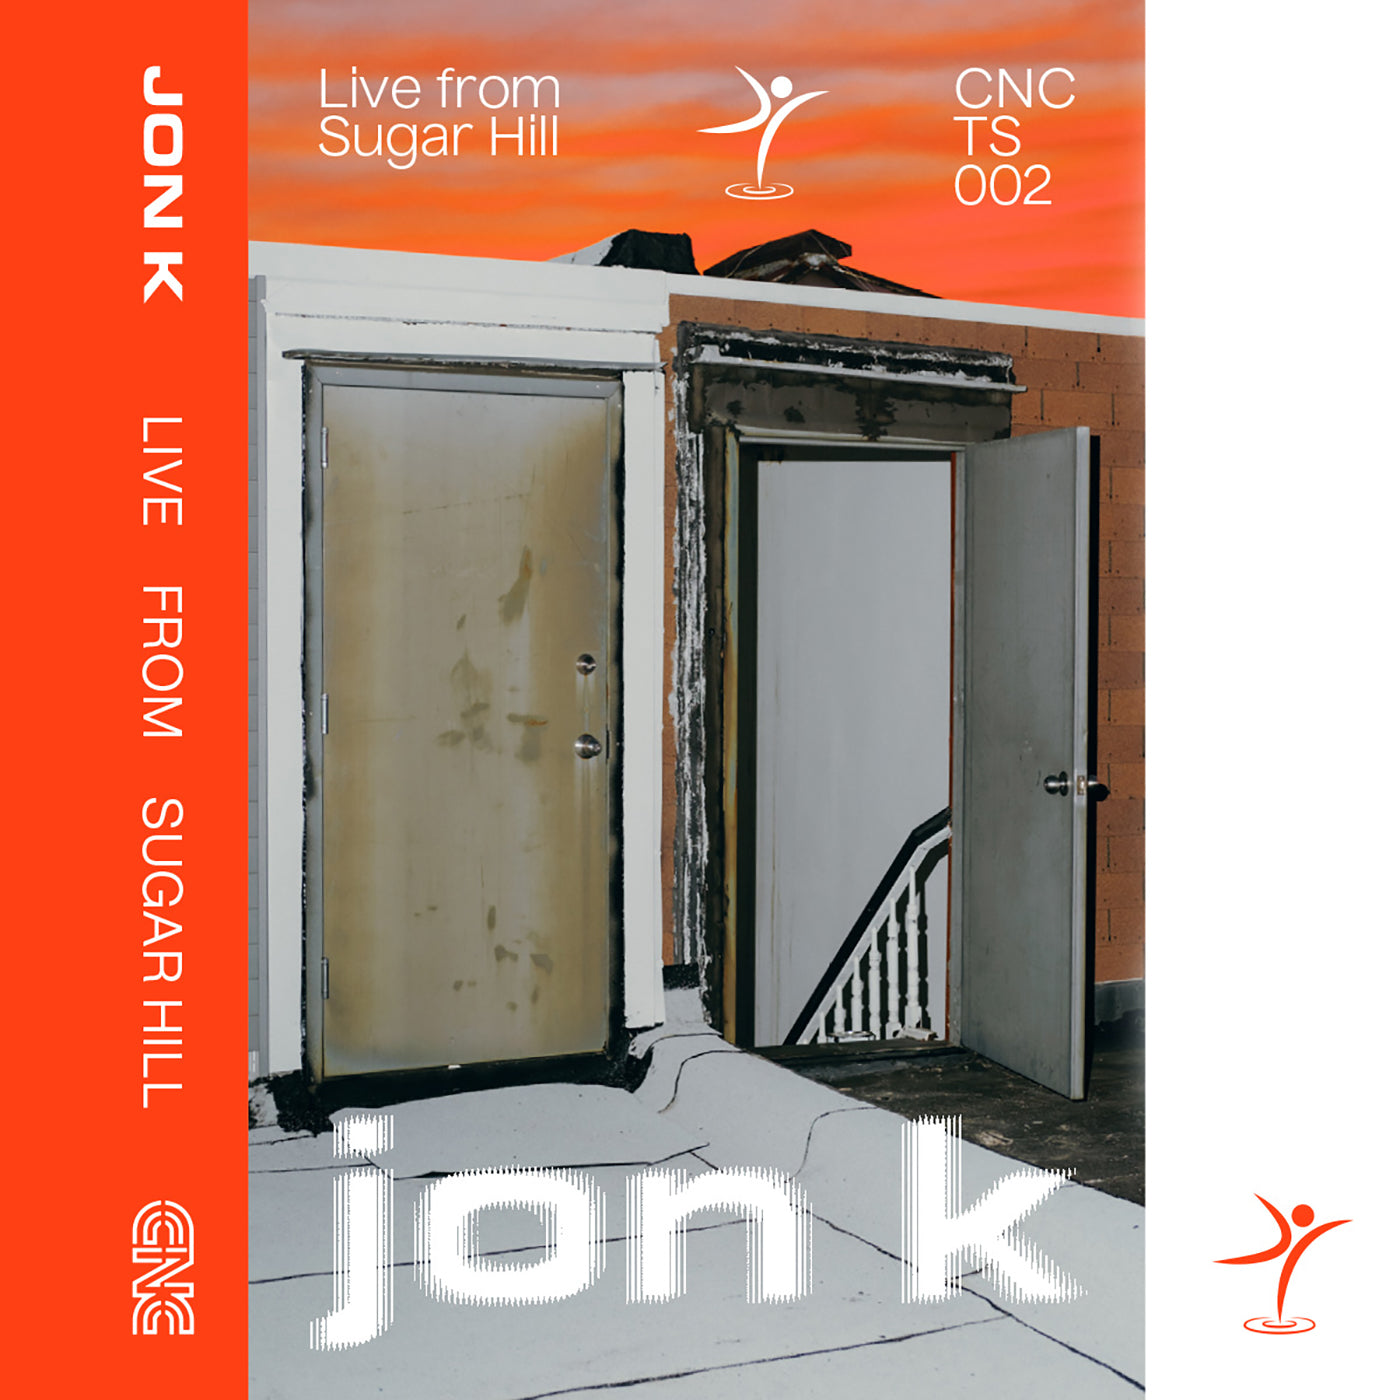 CNCTS002 - JON K - LIVE AT SUGAR HILL - Sold Out